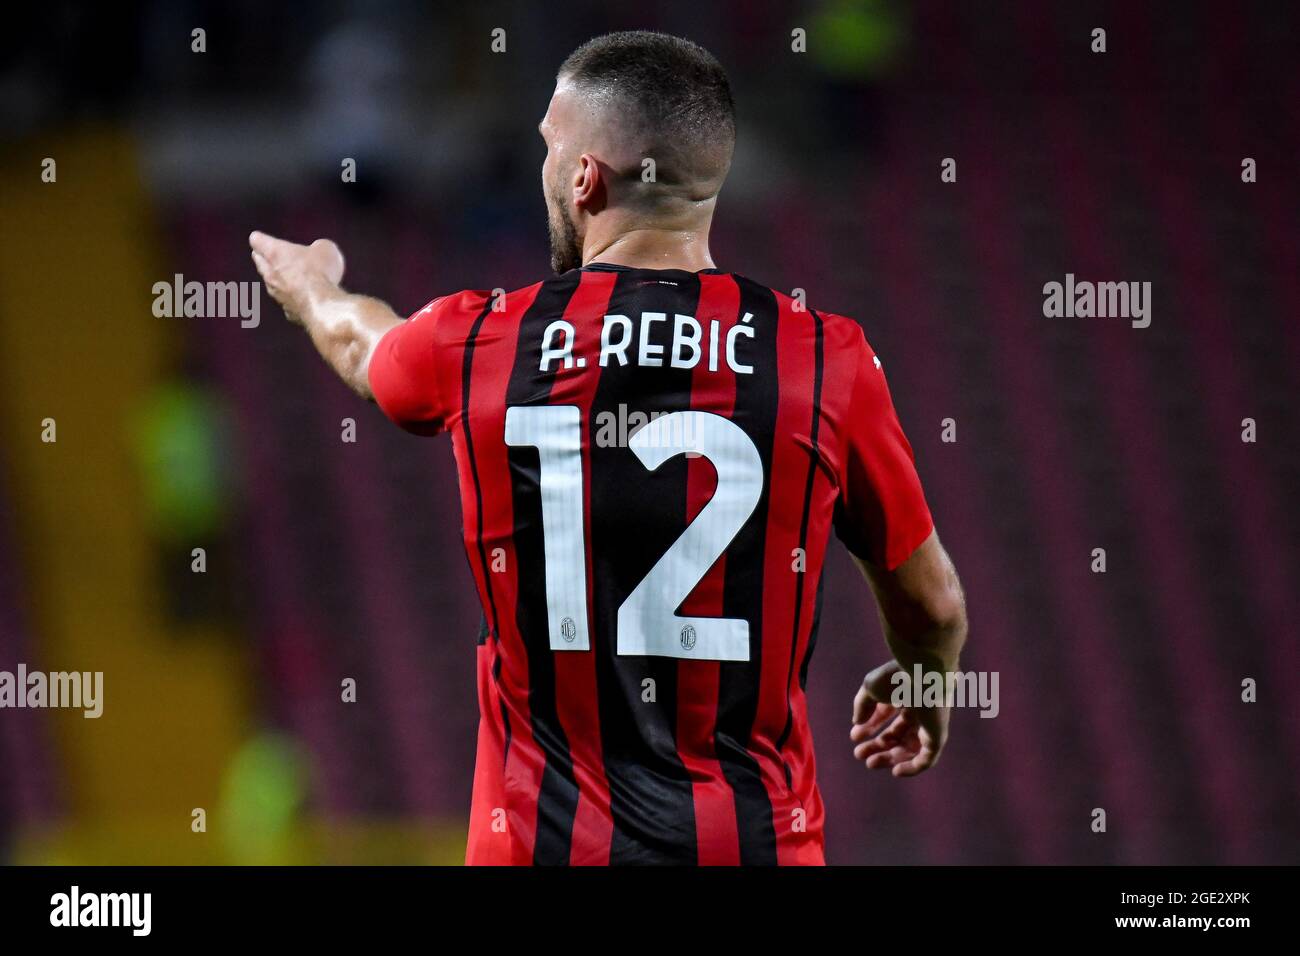 Rebic (Milan) number and name during AC Milan vs Panathinaikos FC, friendly football match, Trieste, It - .LiveMedia/Ettore Griffoni Stock - Alamy